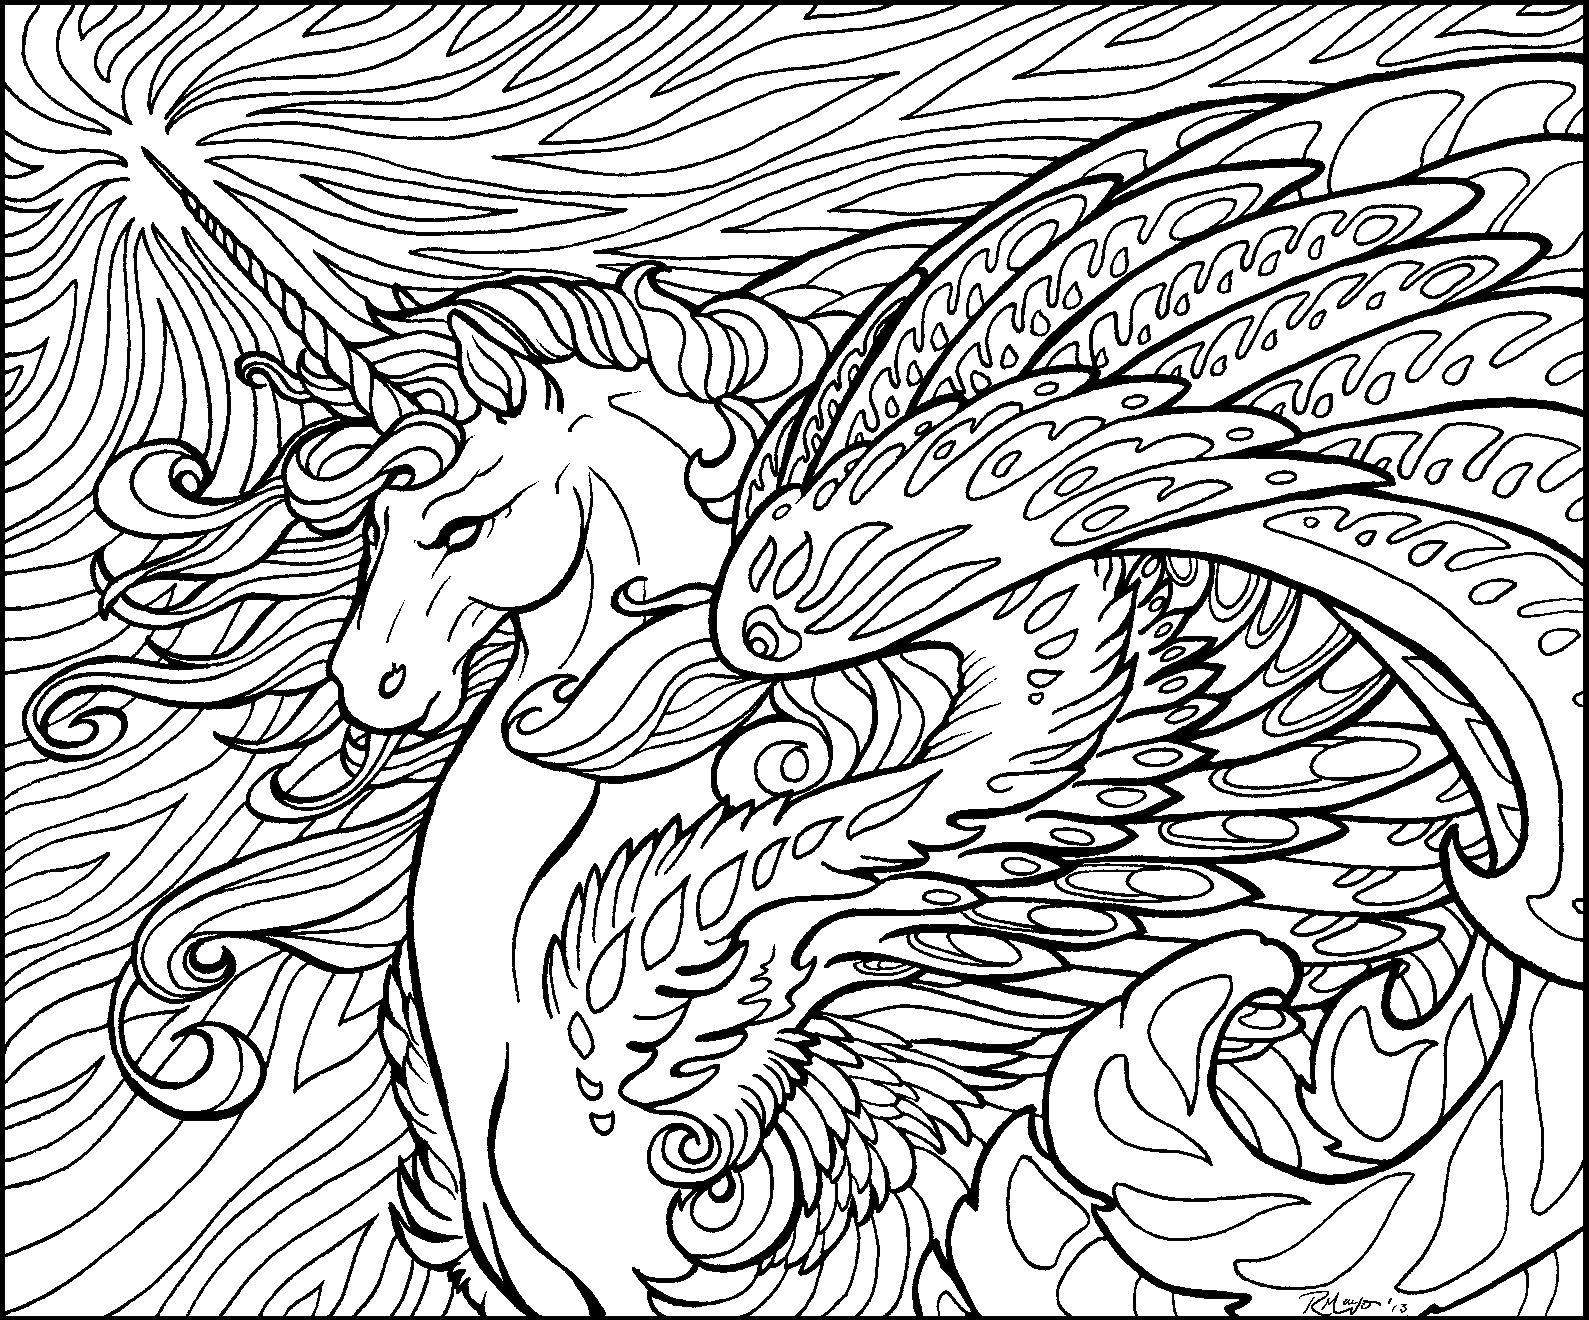 Free Unicorn Coloring Pages For Adults Download Free Clip Art